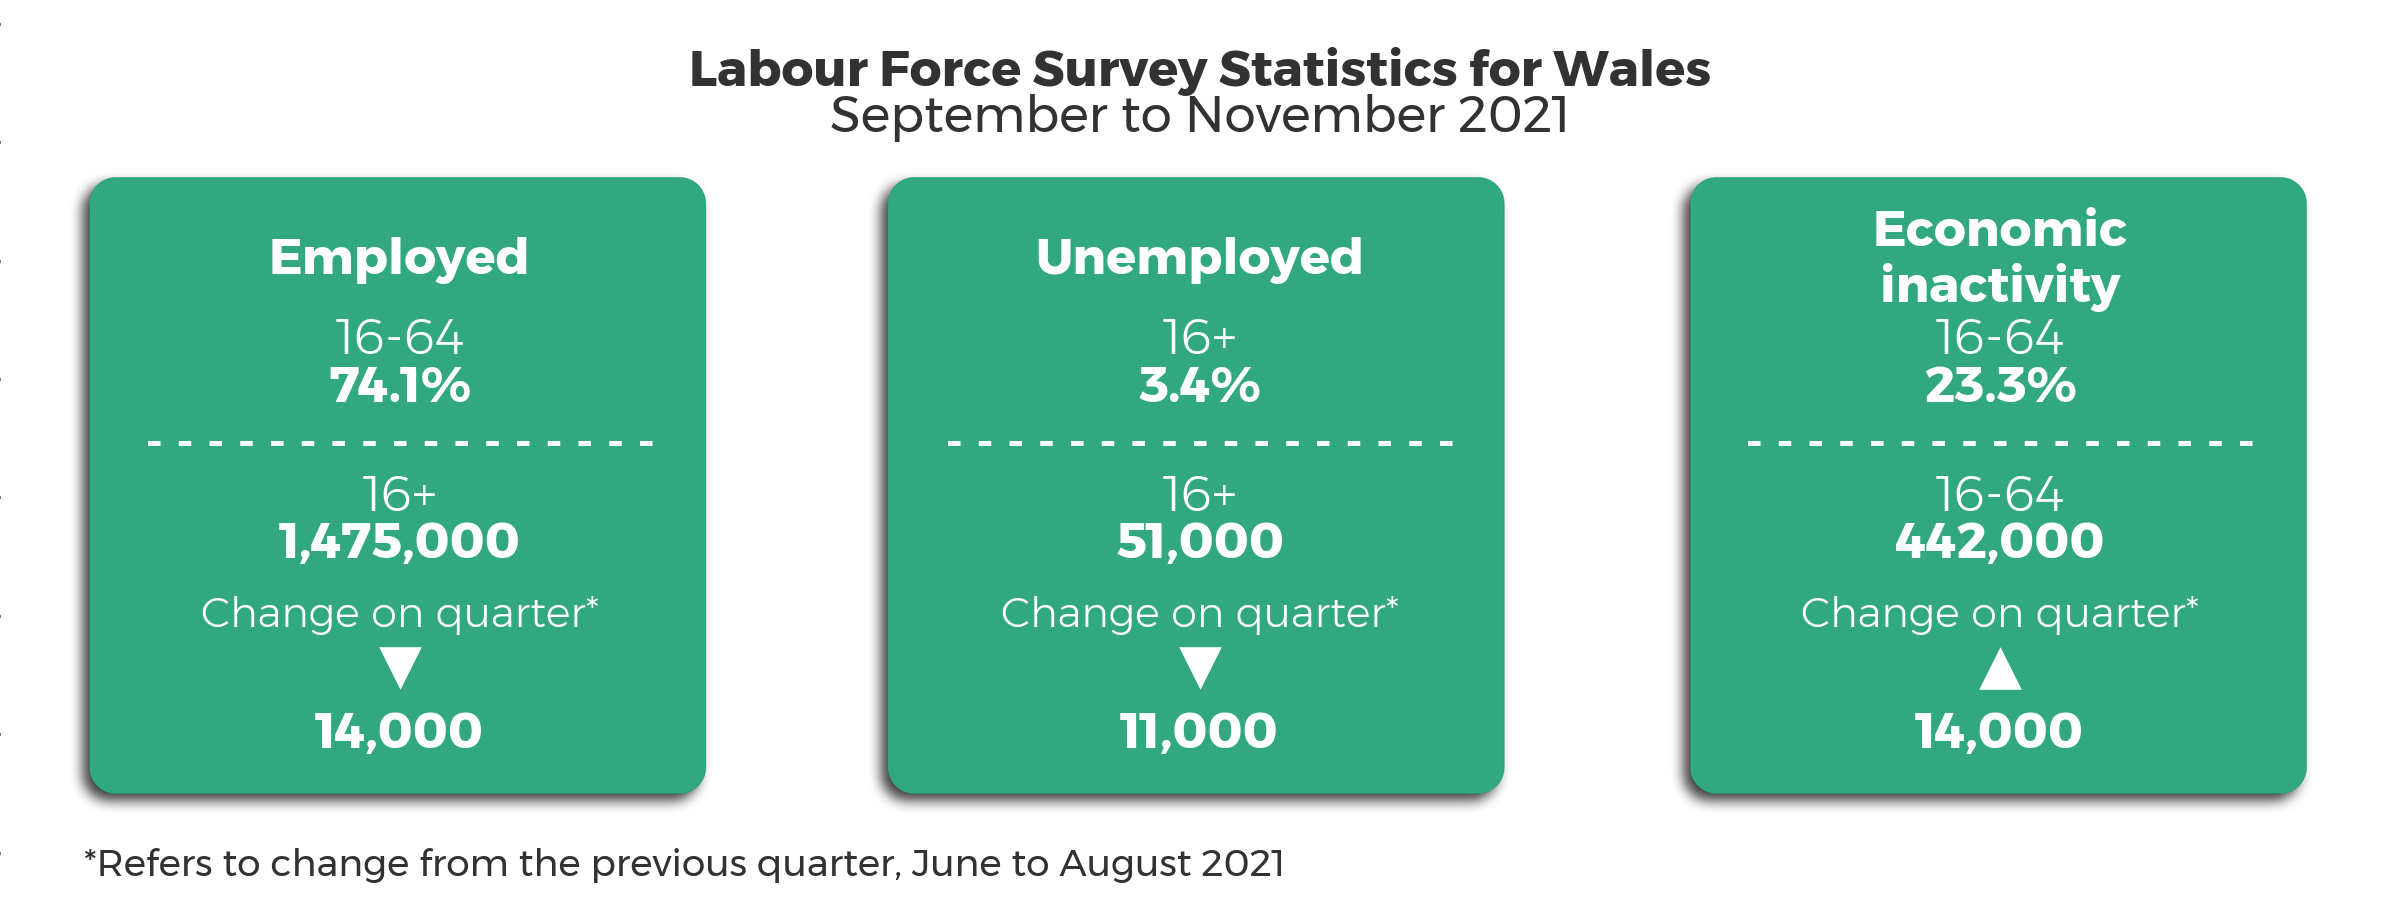 Headline statistics September 2021 to November 2021 compared to the previous quarter June 2021 to August 2021. The 16+ unemployment rate is 3.4% with 51,000 people unemployed, a decrease of 11,000 from the previous quarter. The 16-64 employment rate is 74.1%. 1,475,000 people aged 16+ employed, a decrease of 14,000 from the previous quarter. The 16-64 economic inactivity rate is 23.3% with 442,000 people economically active, an increase of 14,000 on the previous quarter.